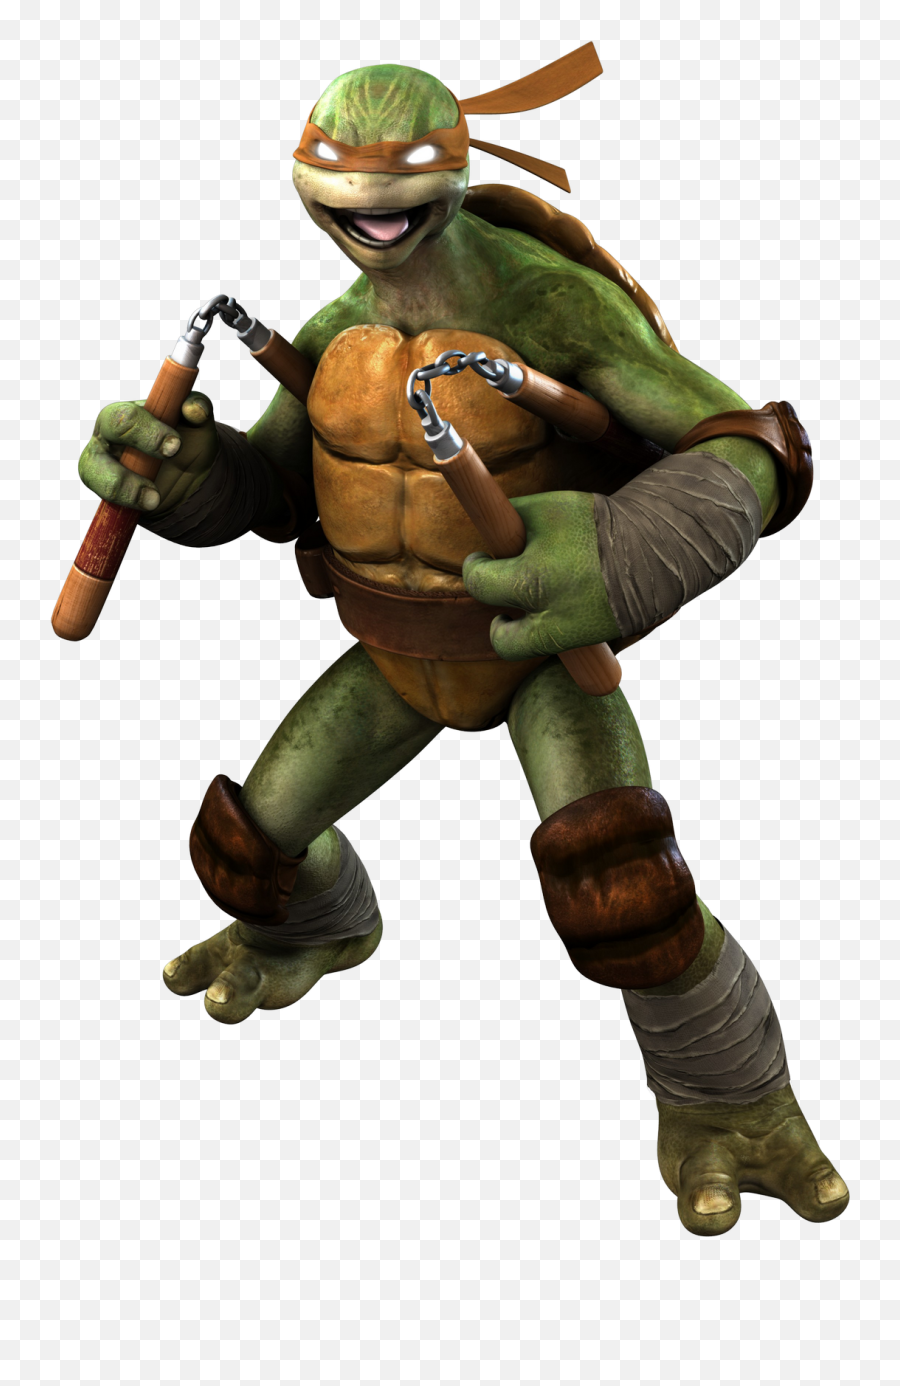 Download Ninja Turtle Png Image For Free - Png Ninja Turtle,Ninja Turtle Png